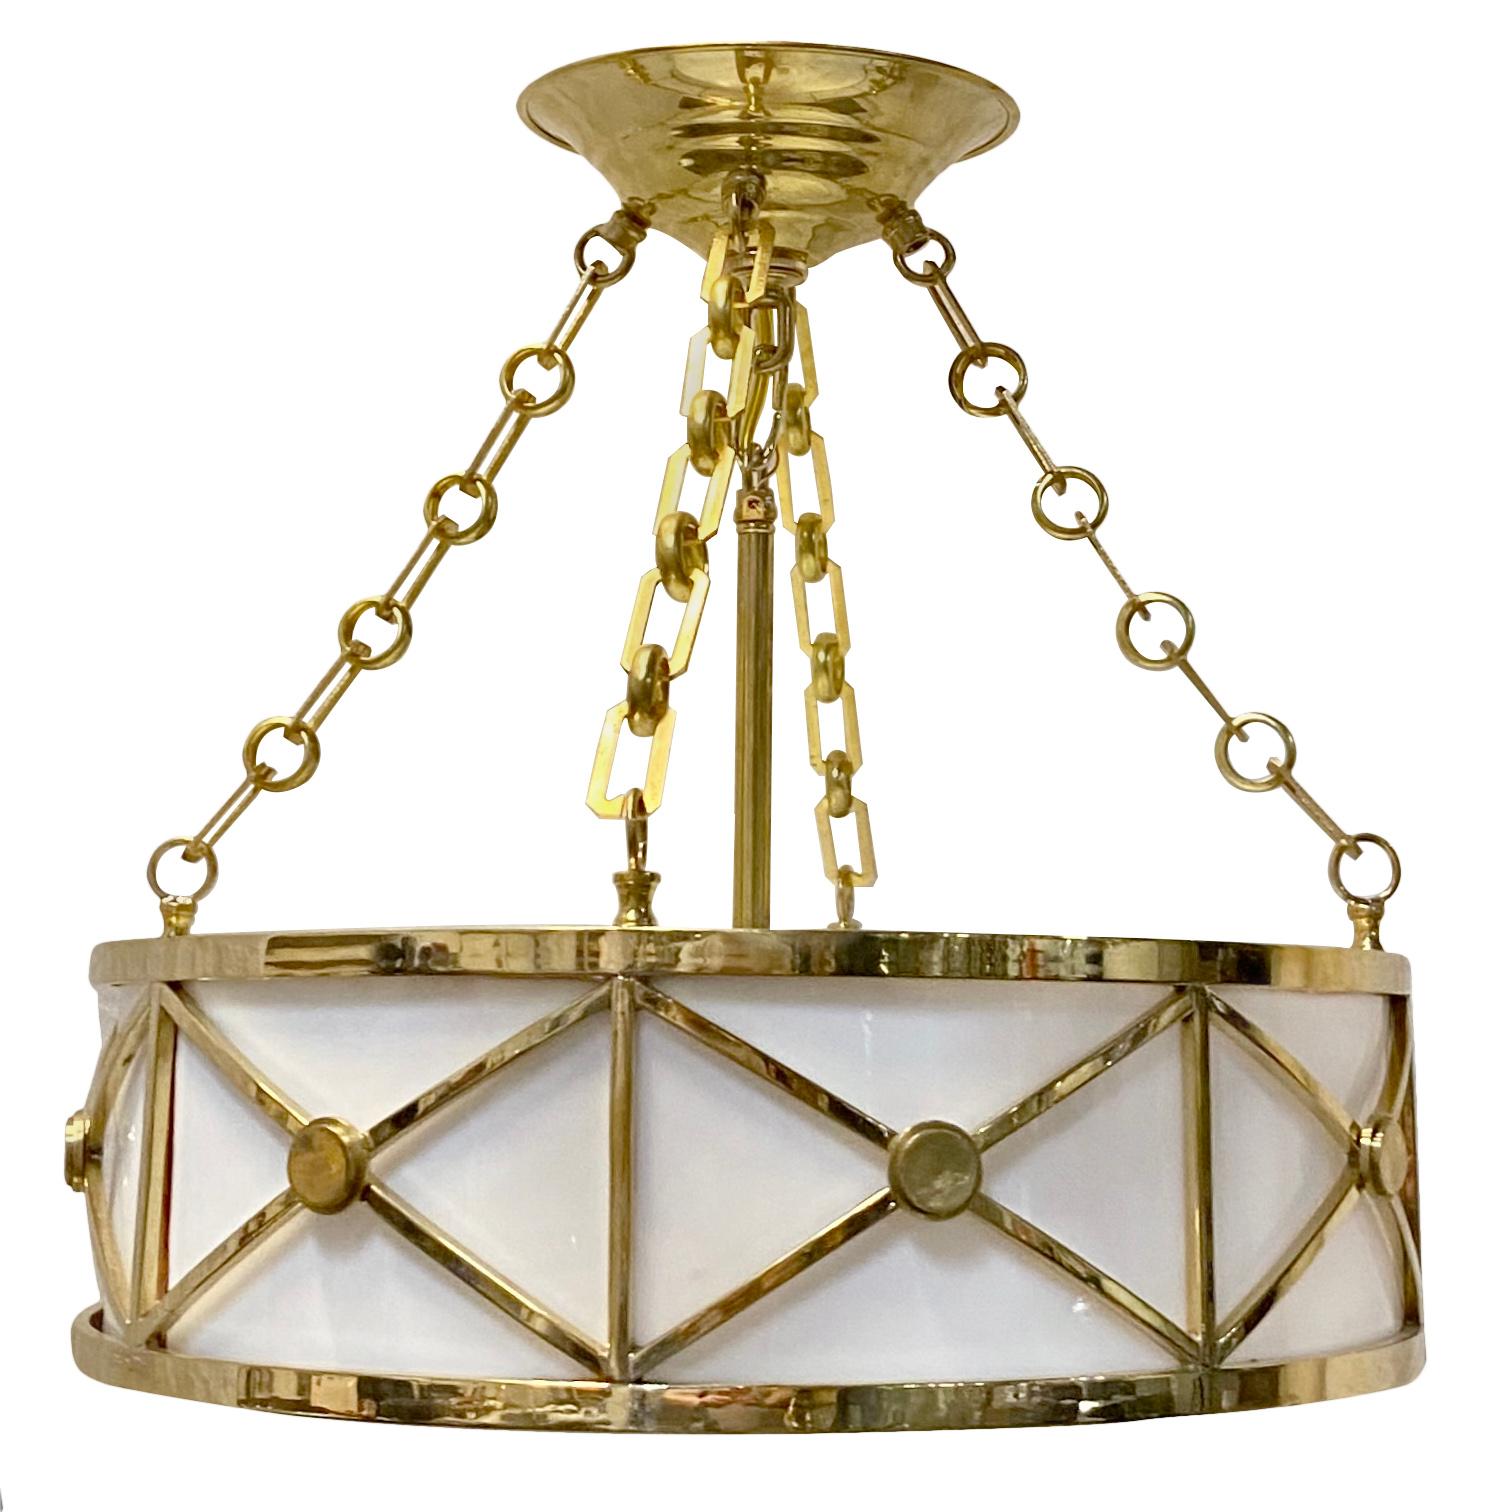 Set of six French circa 1950's neoclassic style bronze light fixtures with white milk glass panels and interior lights. 

Measurements:
Diameter: 16